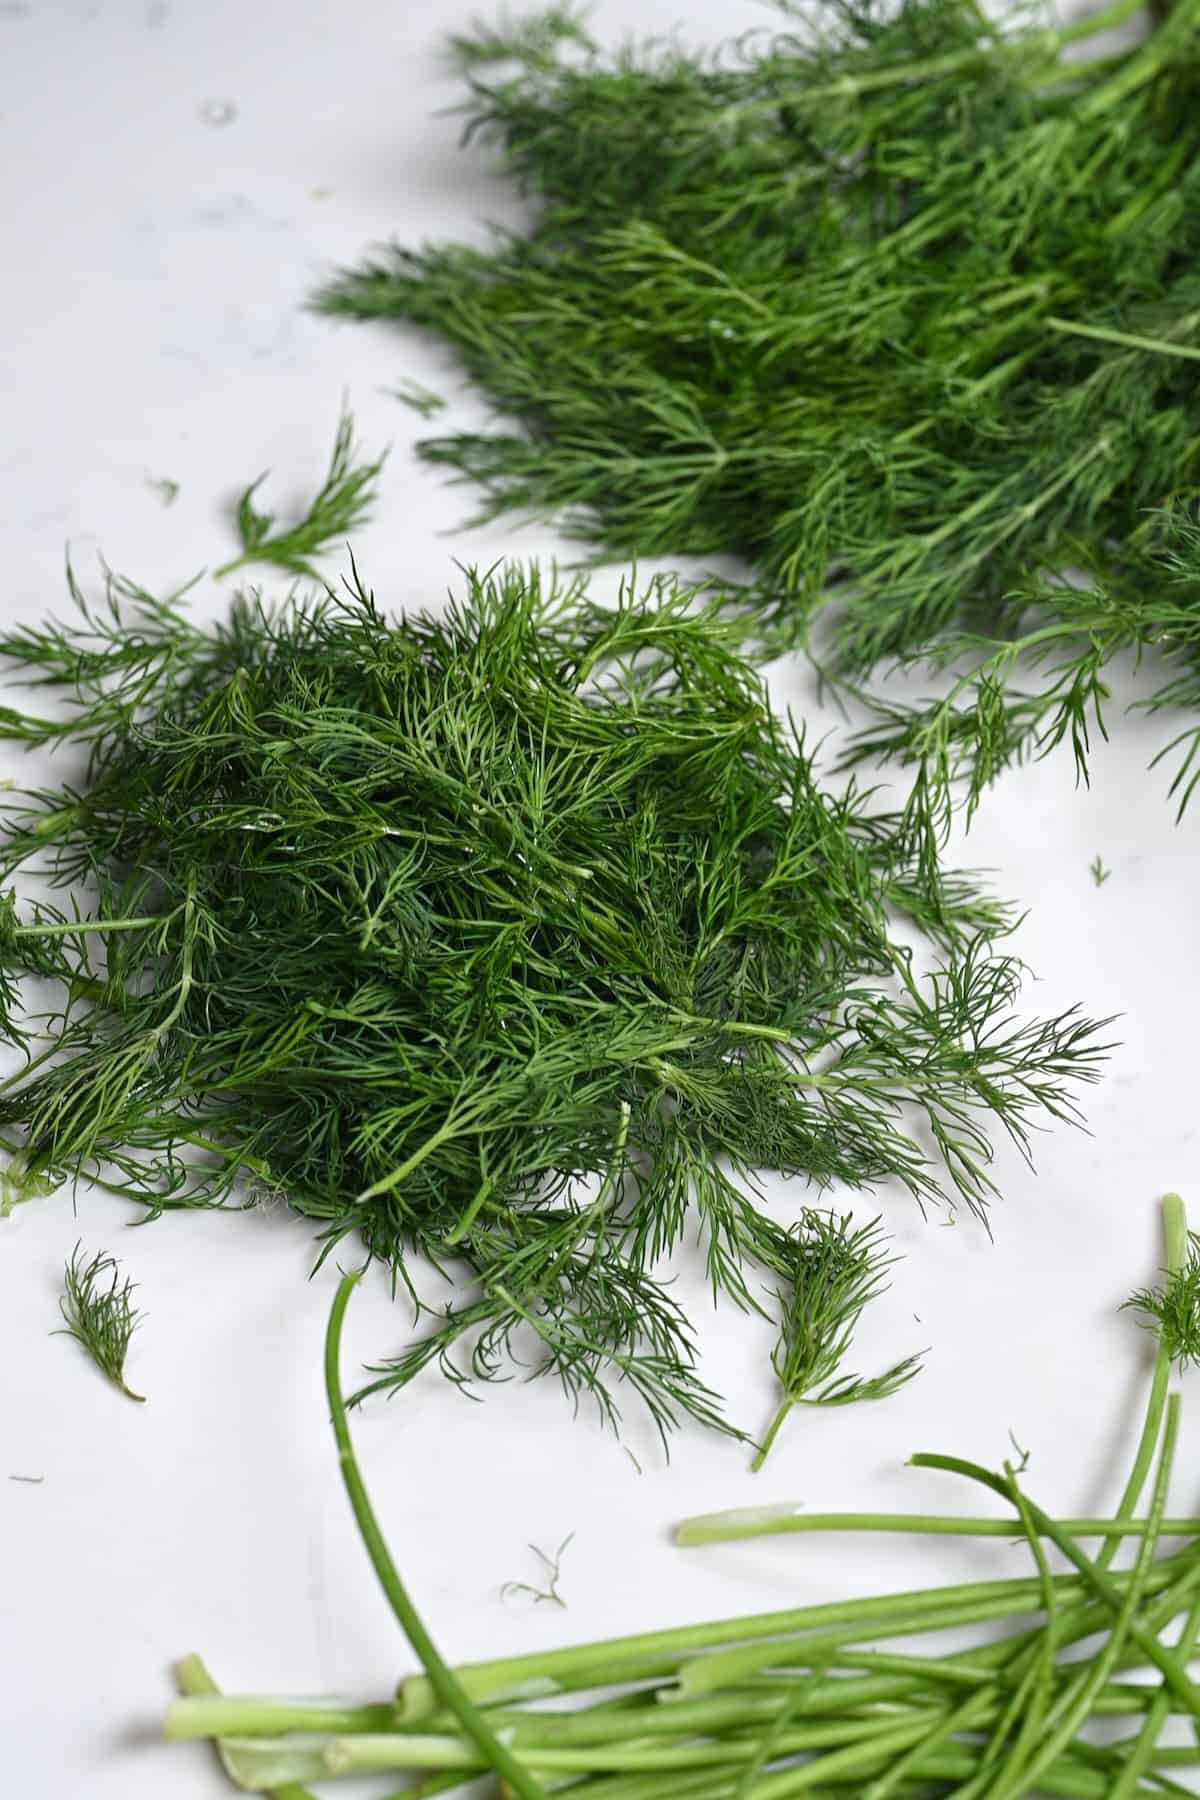 Dill with removed stems